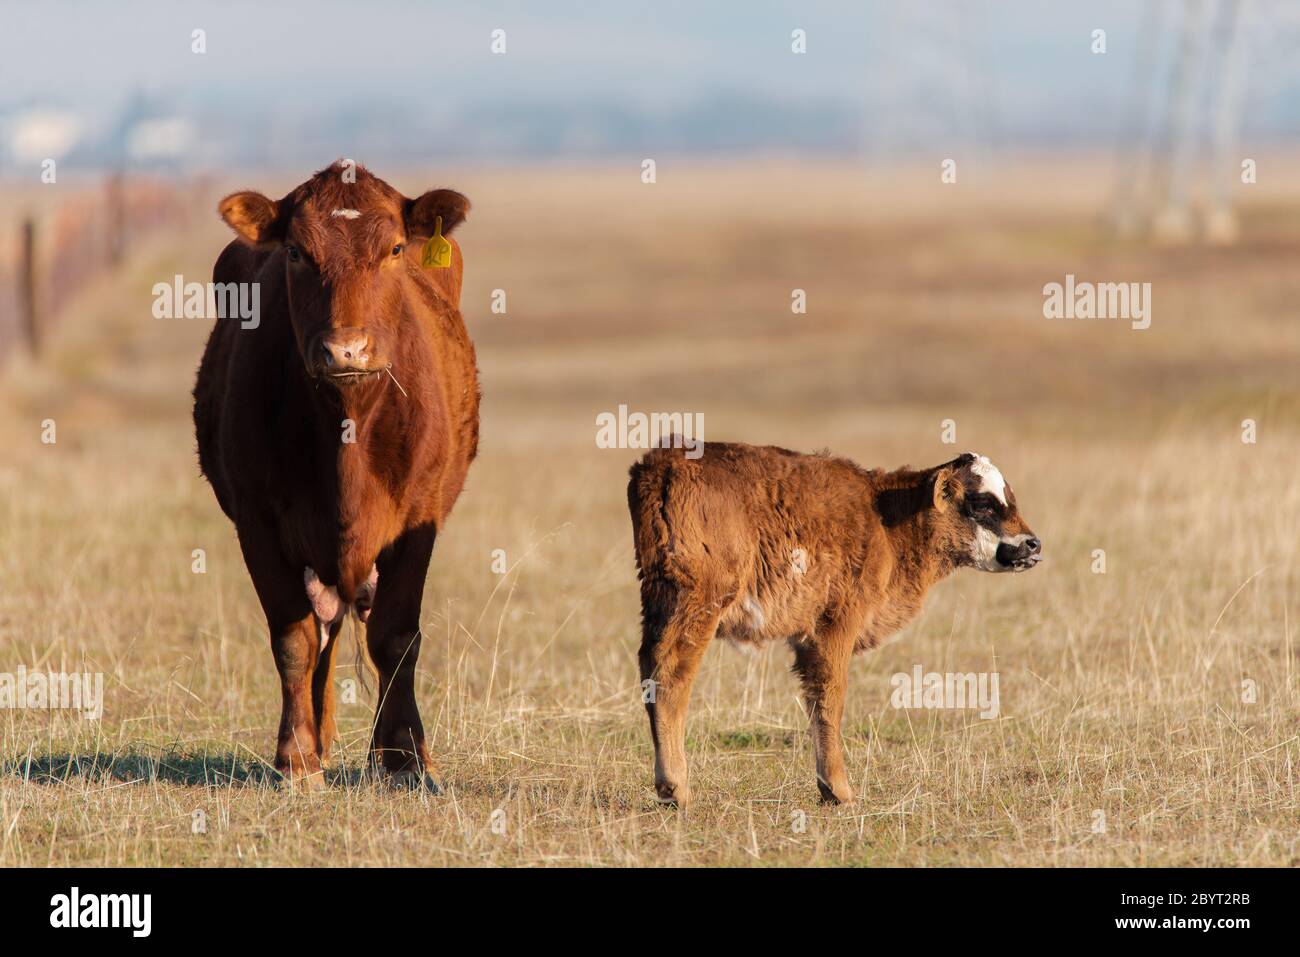 Red cow and calf in northern california free range cattle farm pasture Stock Photo